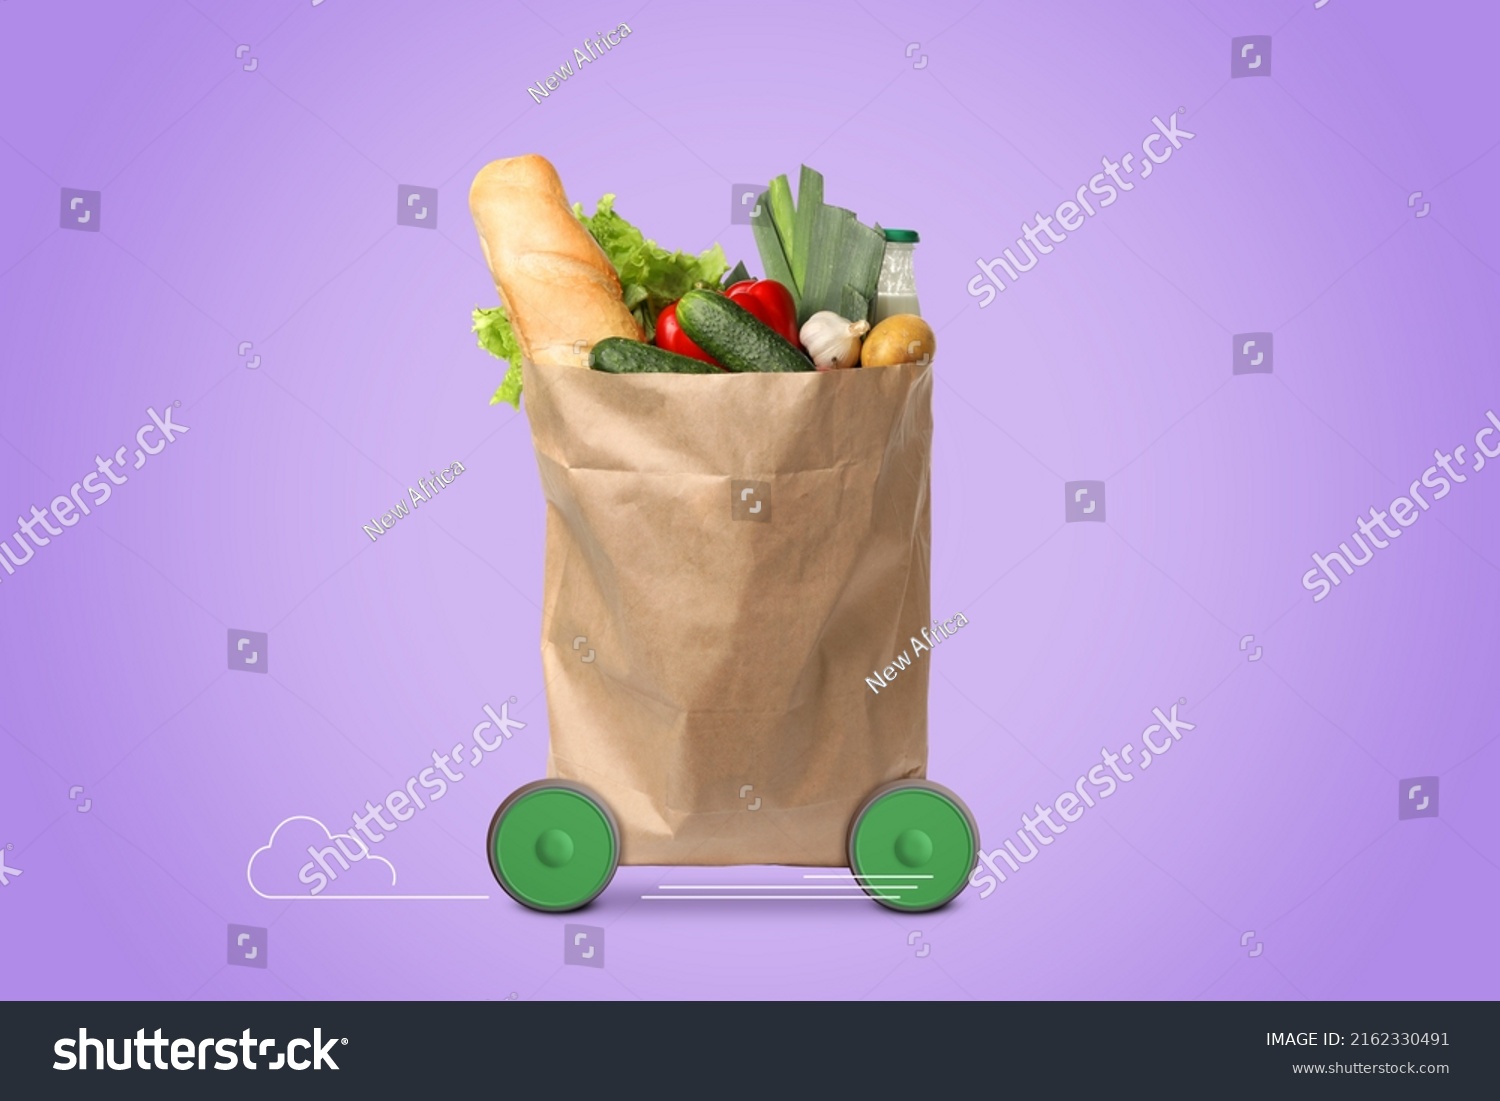 Paper shopping bag full of products on wheels against violet background. Order hurrying to client. Food delivery service #2162330491